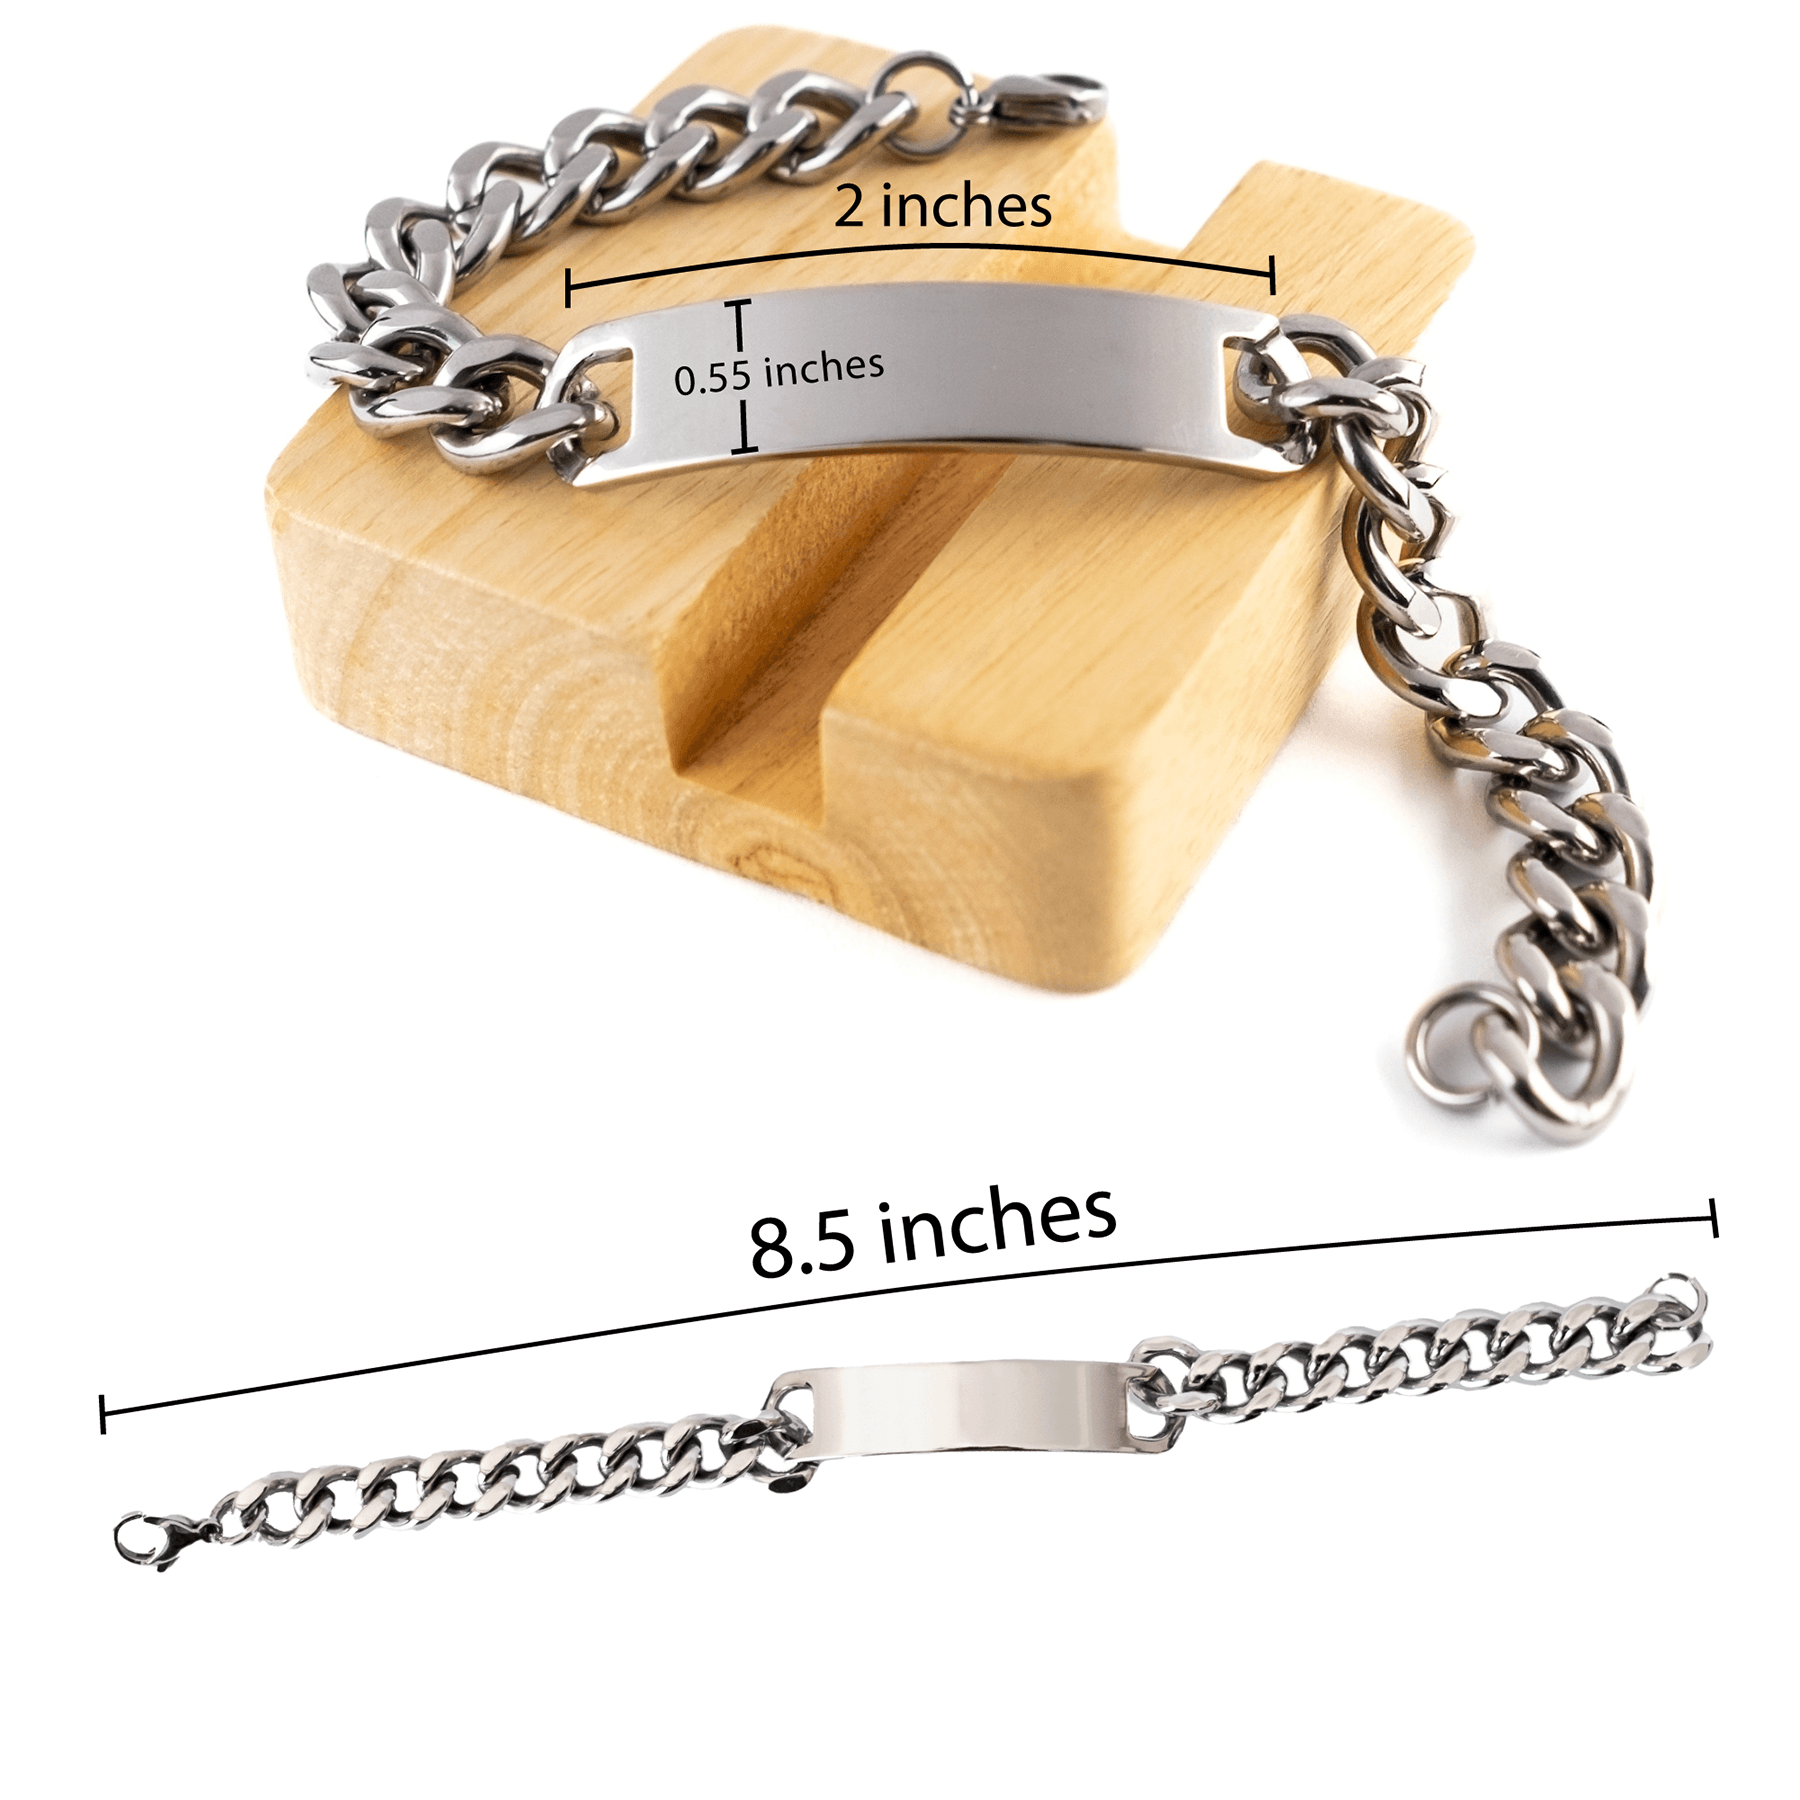 To My Little Brother Gifts, Inspirational Little Brother Cuban Chain Stainless Steel Bracelet, Sentimental Birthday Christmas Unique Gifts For Little Brother Behind you, all your memories, before you, all your dreams, around you, all who love you, within - Mallard Moon Gift Shop